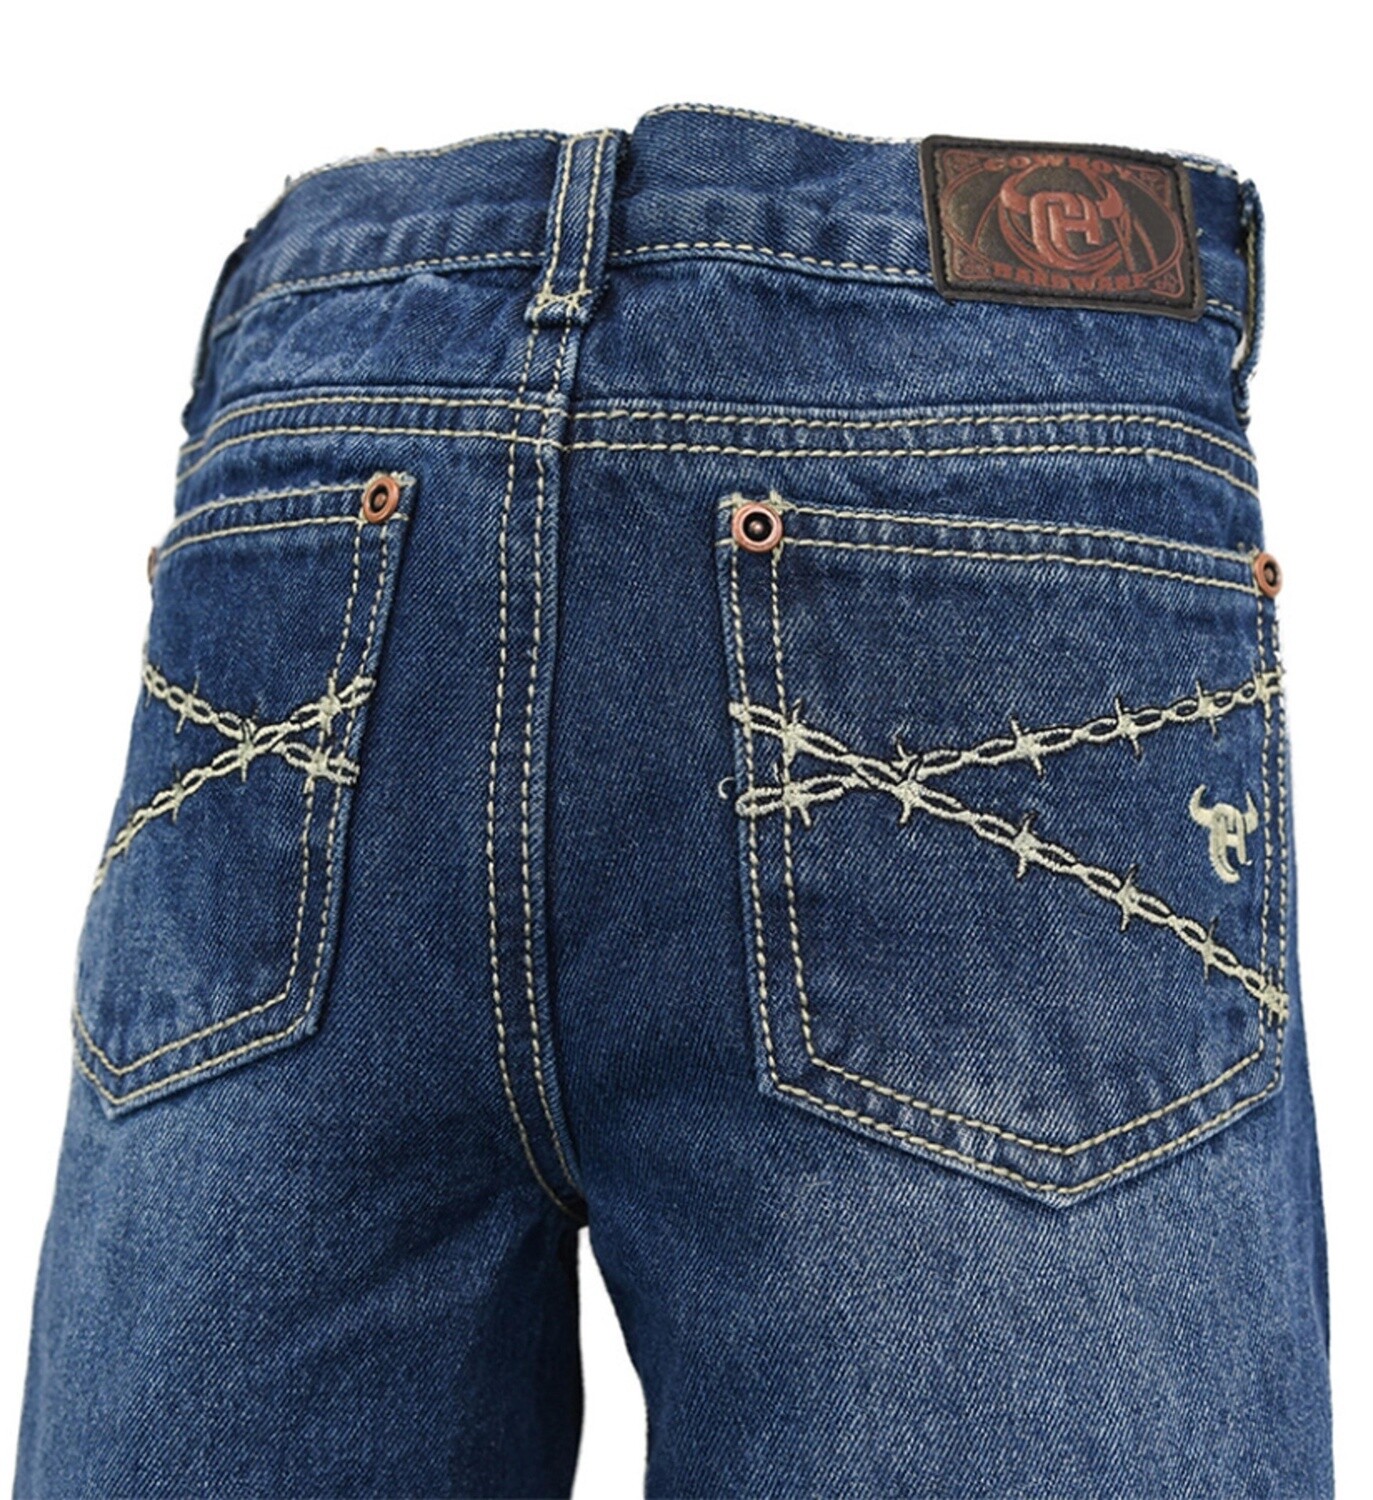 302016-450 BOYS COWBOY HARDWARE BARBWIRE EMBOSSED JEANS